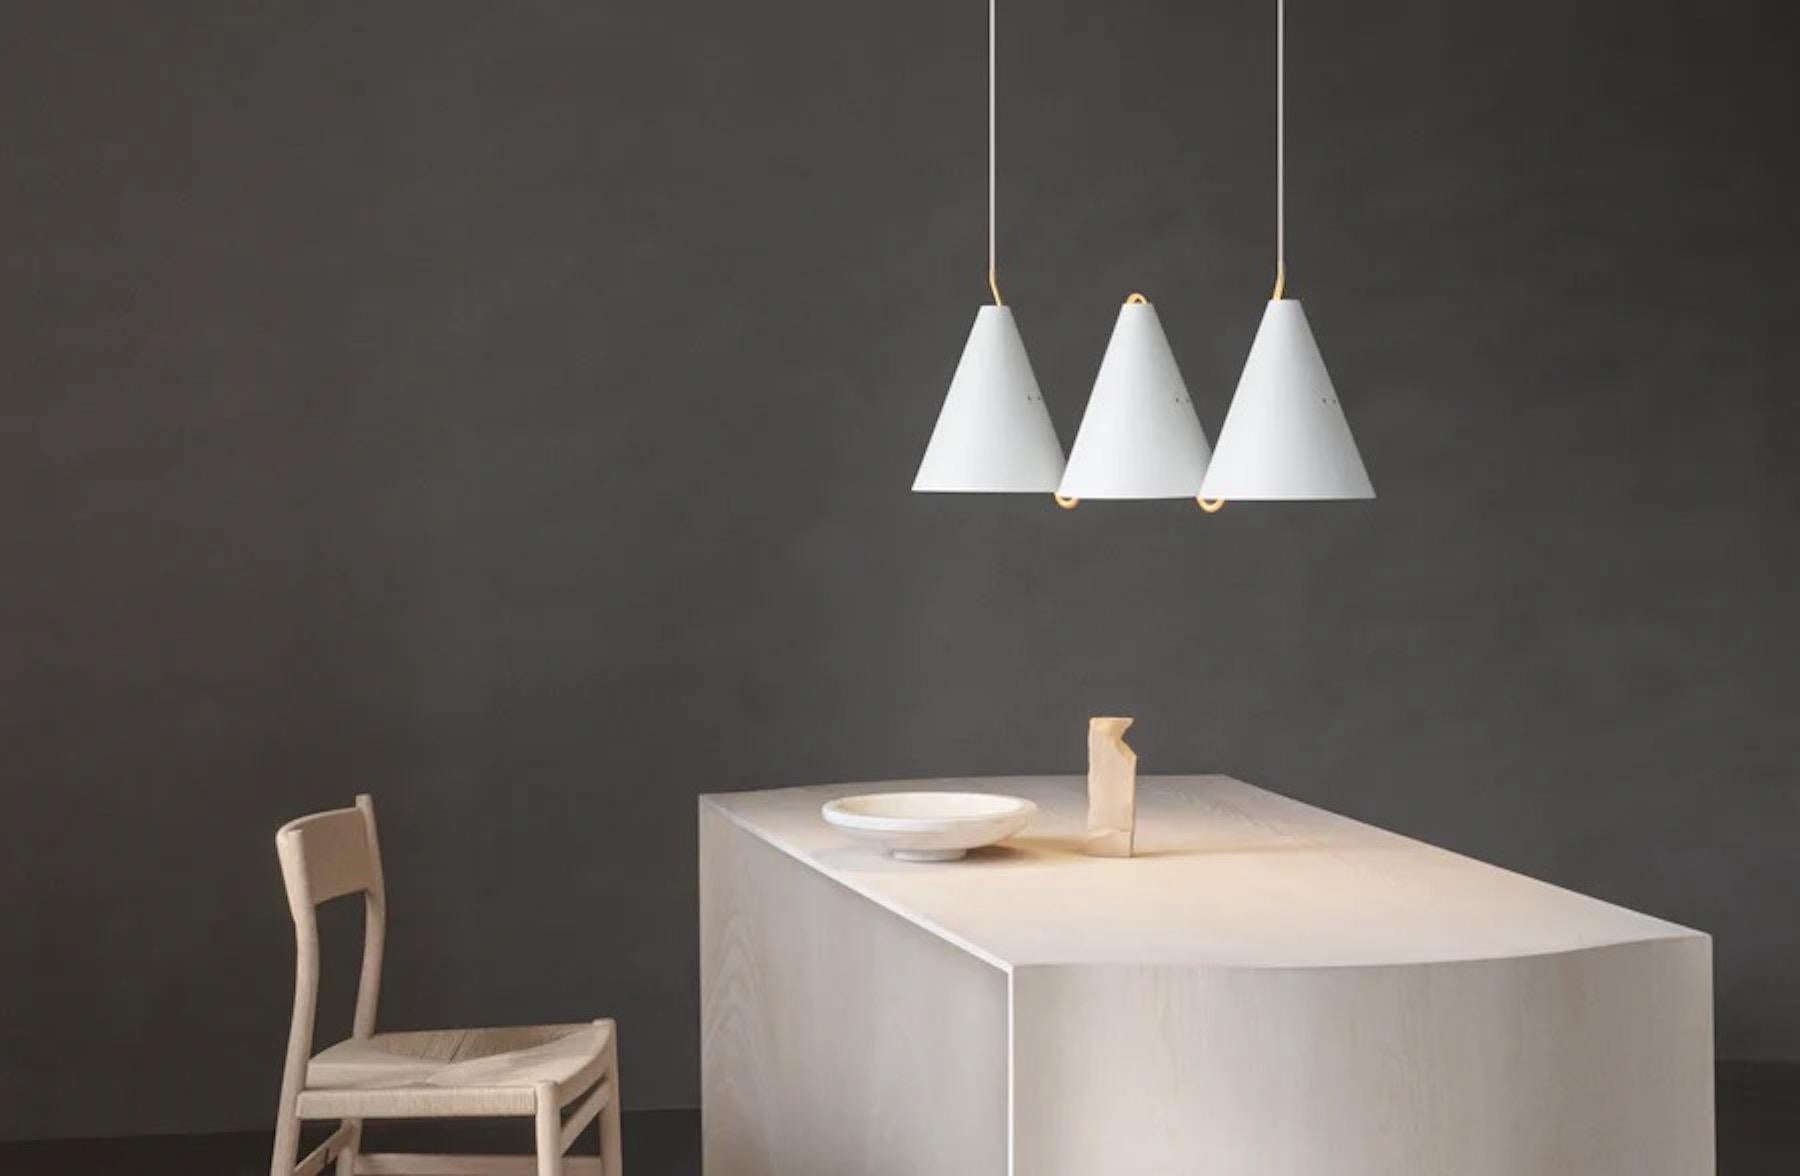 Mosaik, side by side III, pendant lamp in white steel by Lyfa.

Size : H 36,2 x W 79,1 x D 25 cm
Materials: Matt painted steel and Solid brass

Textile wire (white) 300cm

Light source (not included): 
Socket: 3 x E27
Max wattage: 60